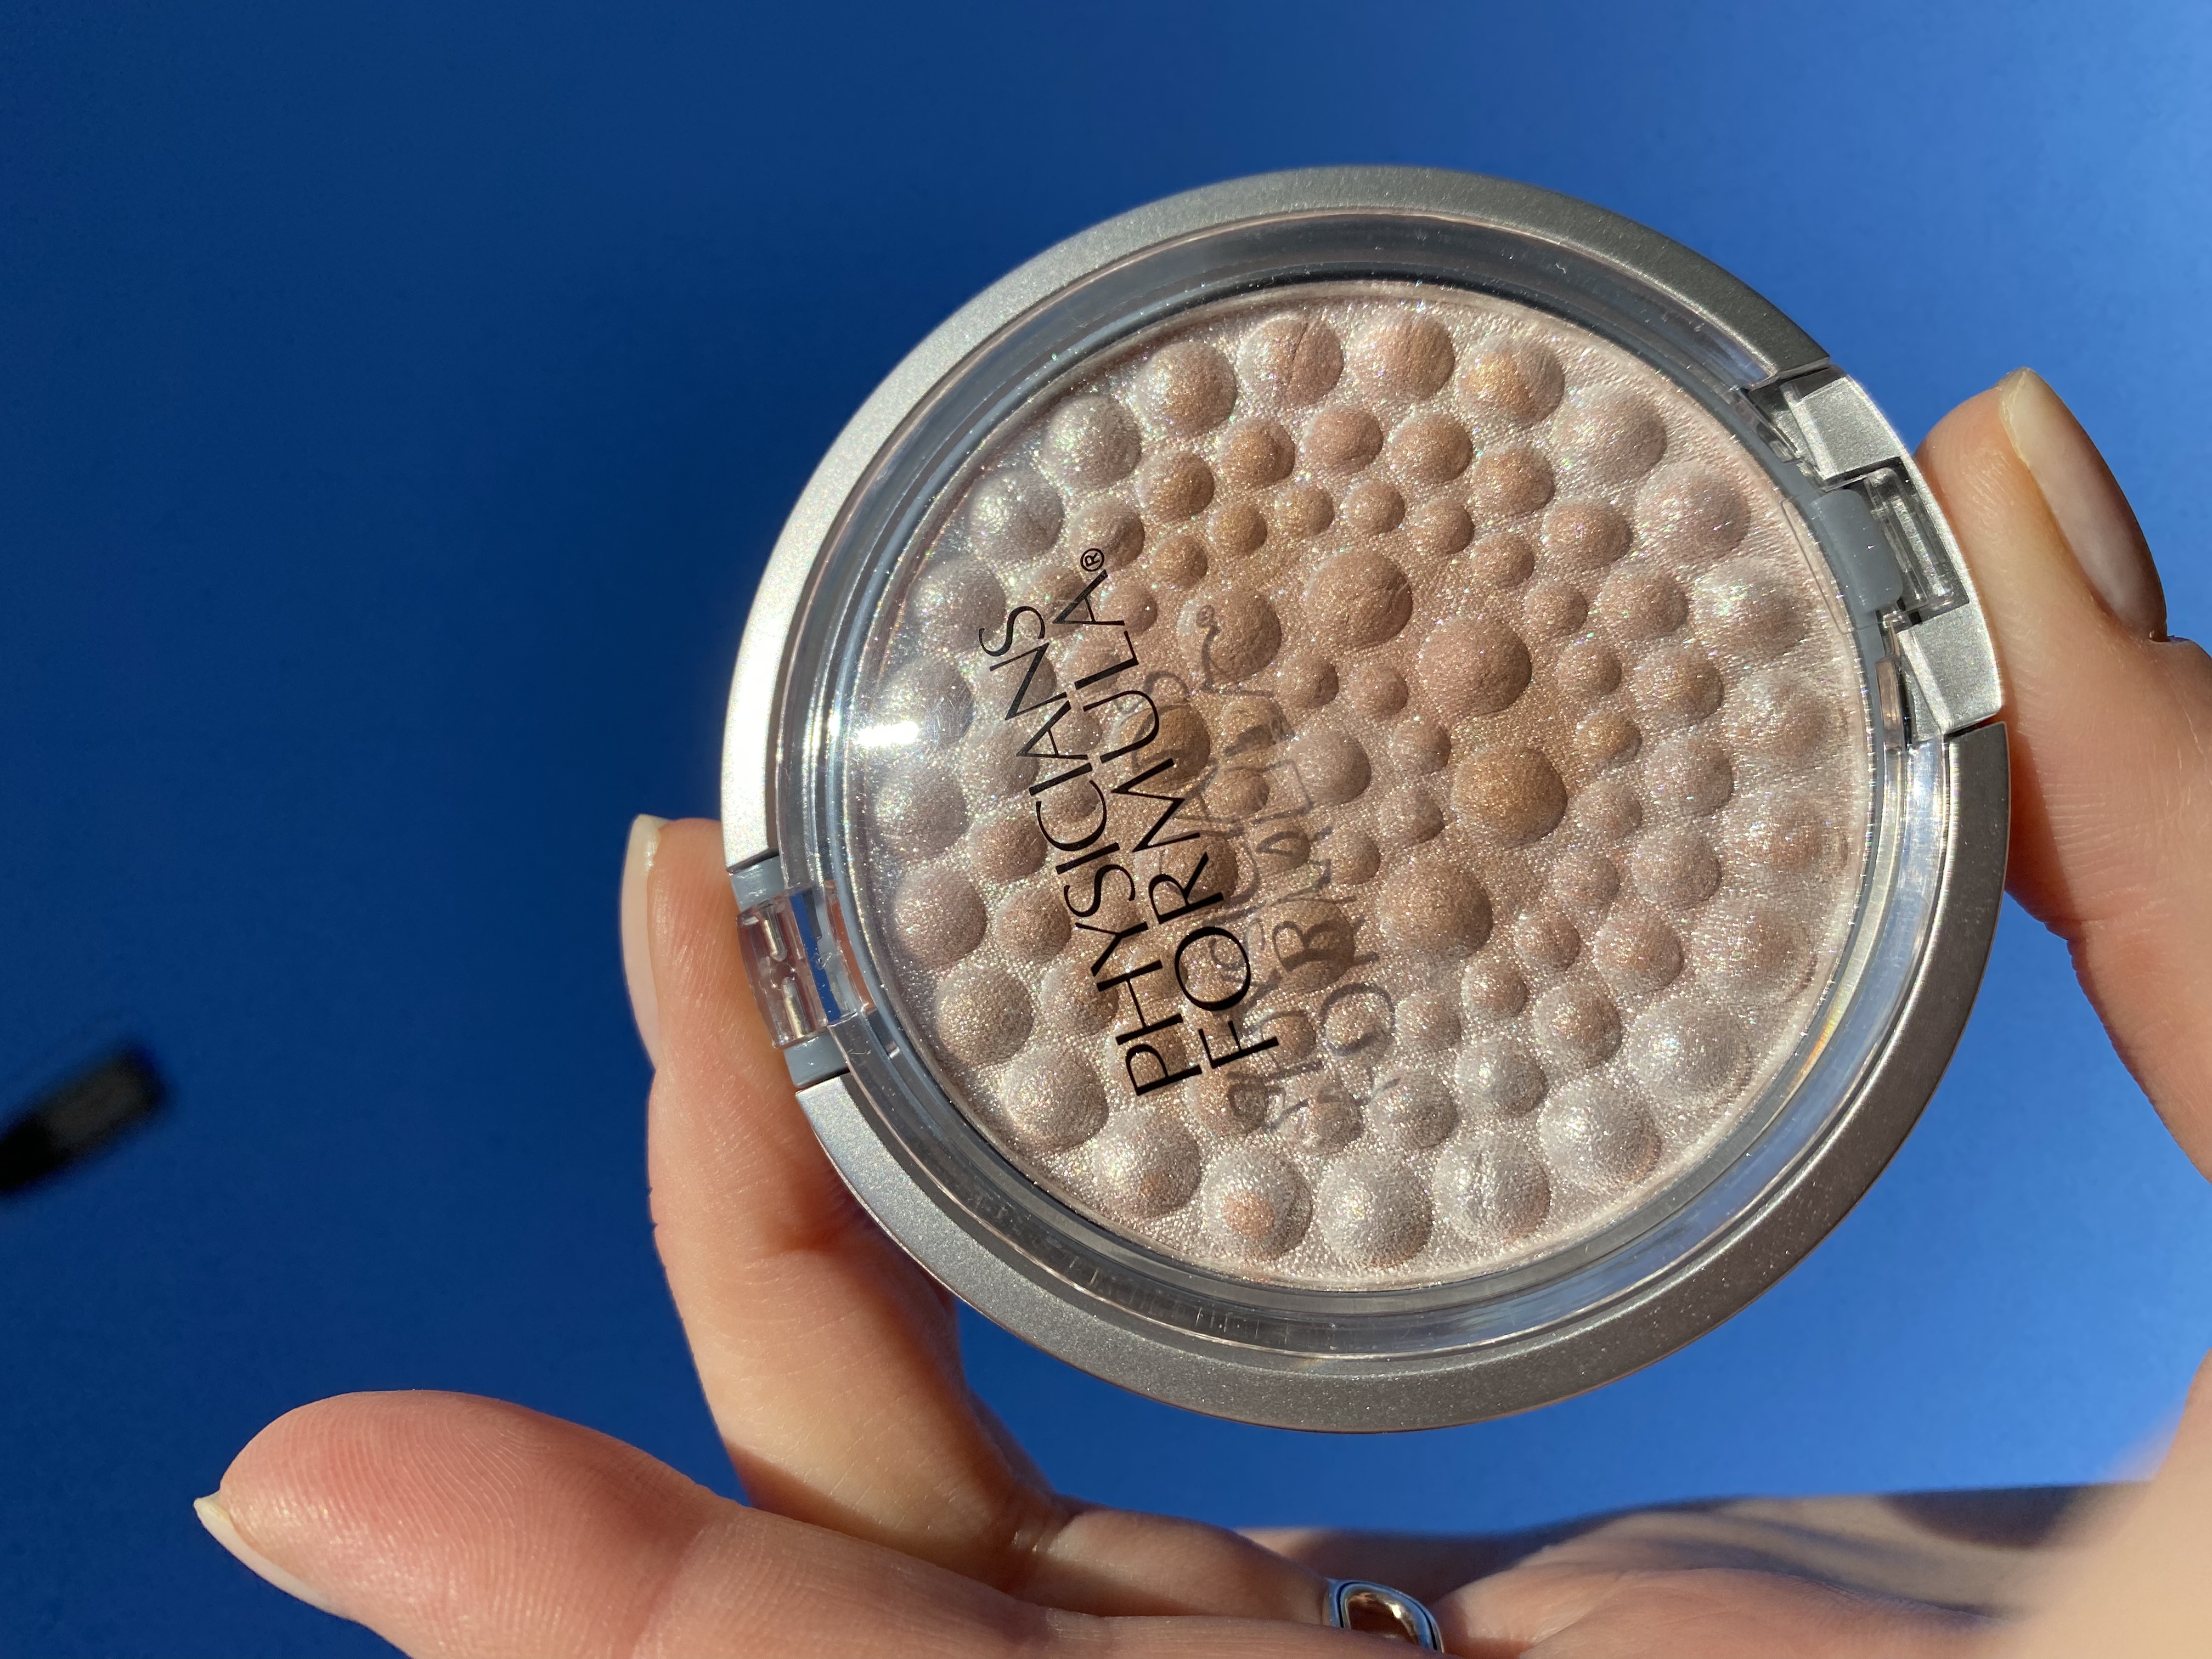 Physicians Formula Powder Palette Mineral Glow Pearls